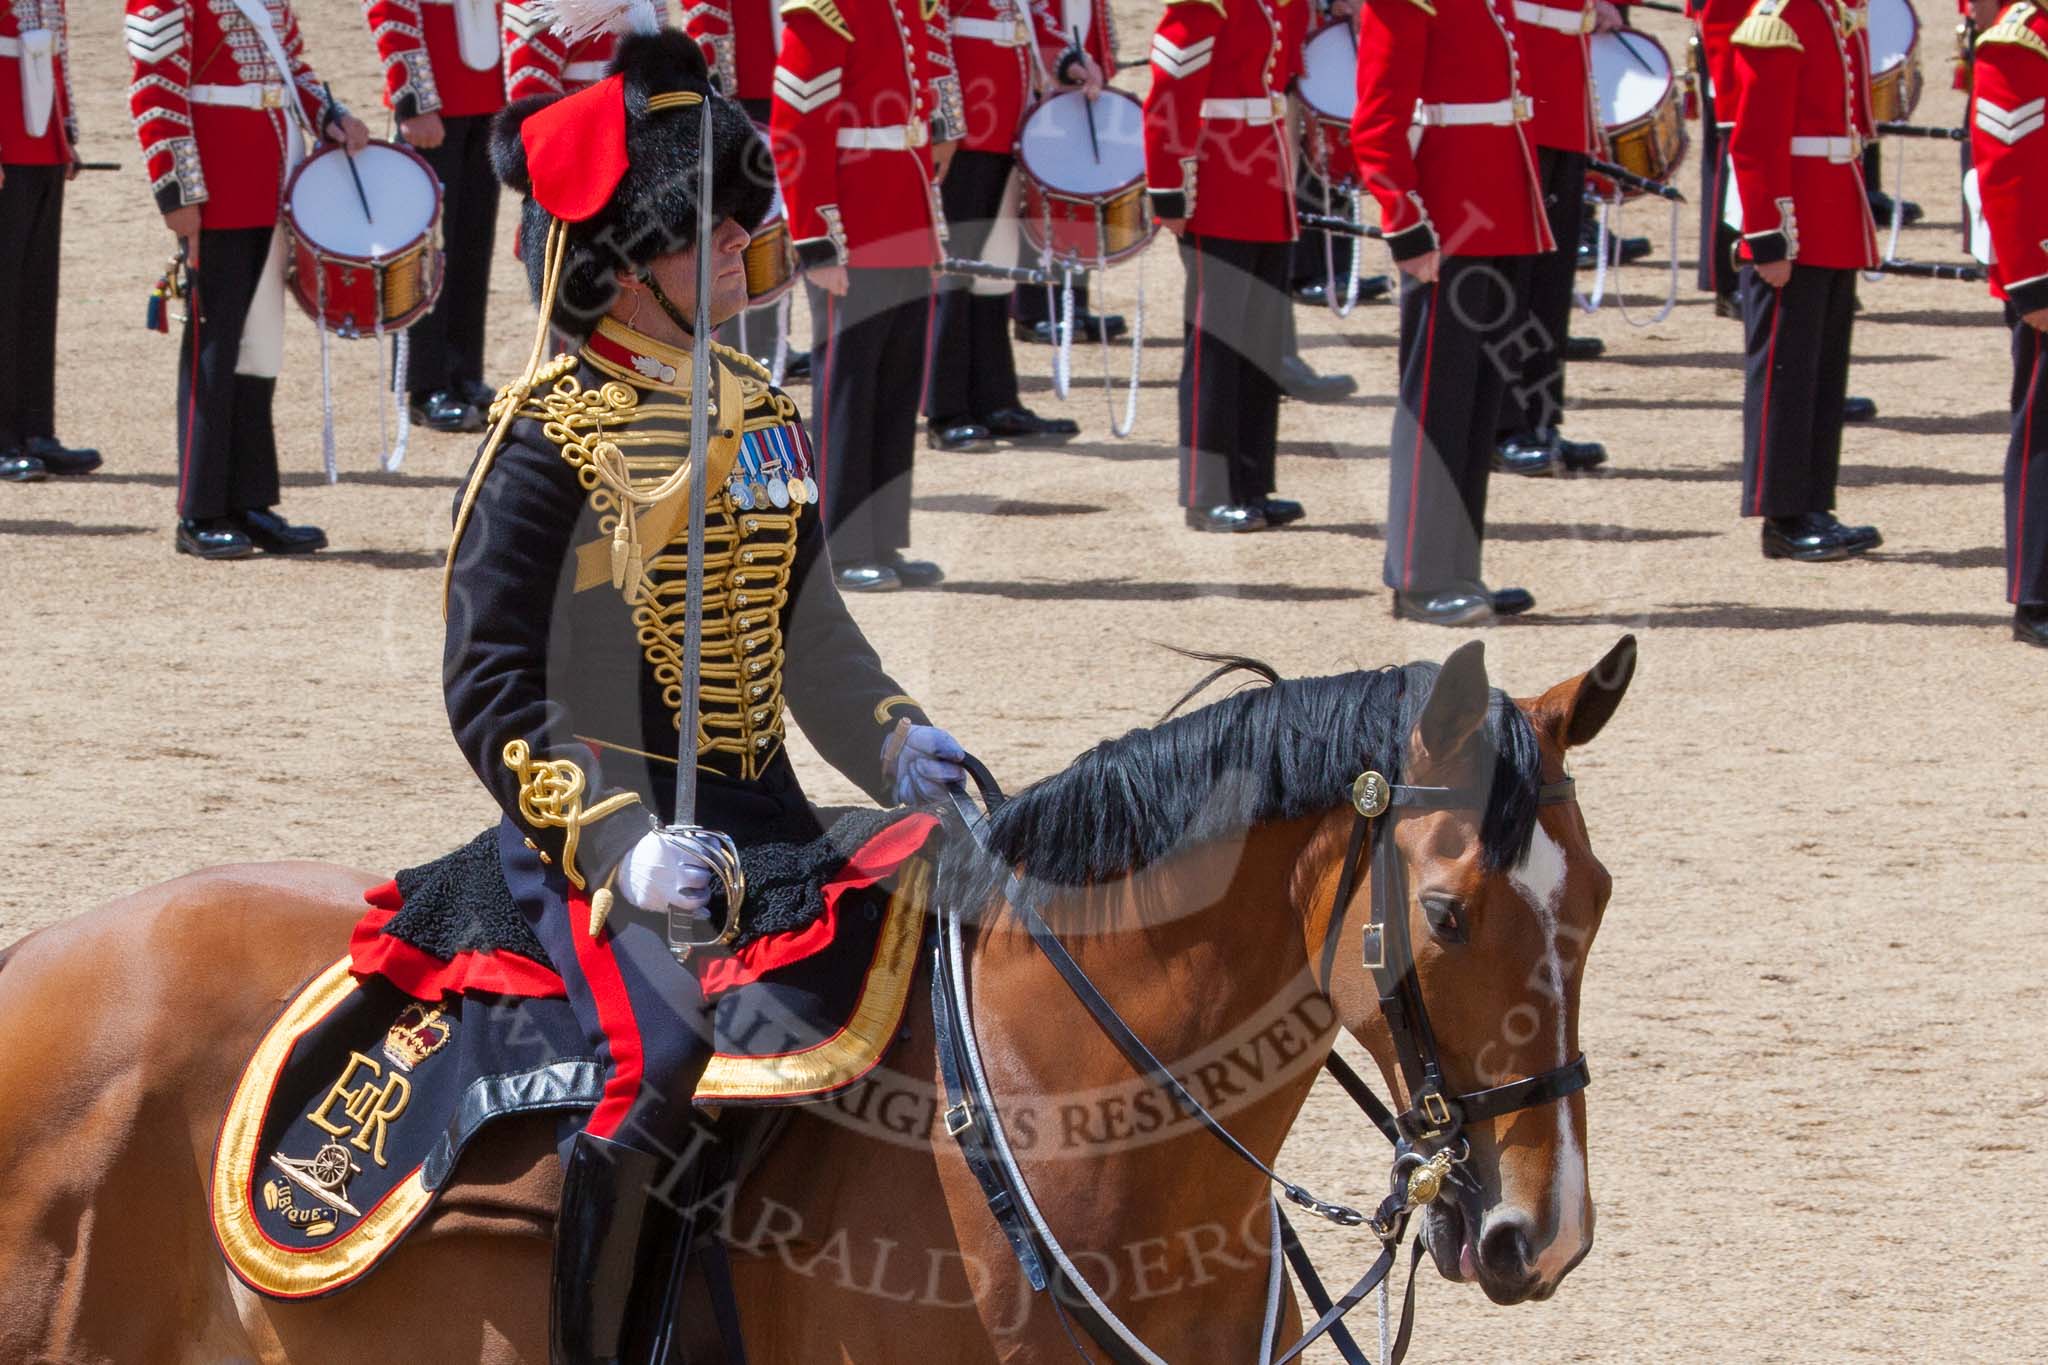 Trooping the Colour 2013: The Ride Past - the King's Troop Royal Horse Artillery. Here the Commanding Officer, Major Mark Edward, Royal Horse Artillery. Image #662, 15 June 2013 11:54 Horse Guards Parade, London, UK